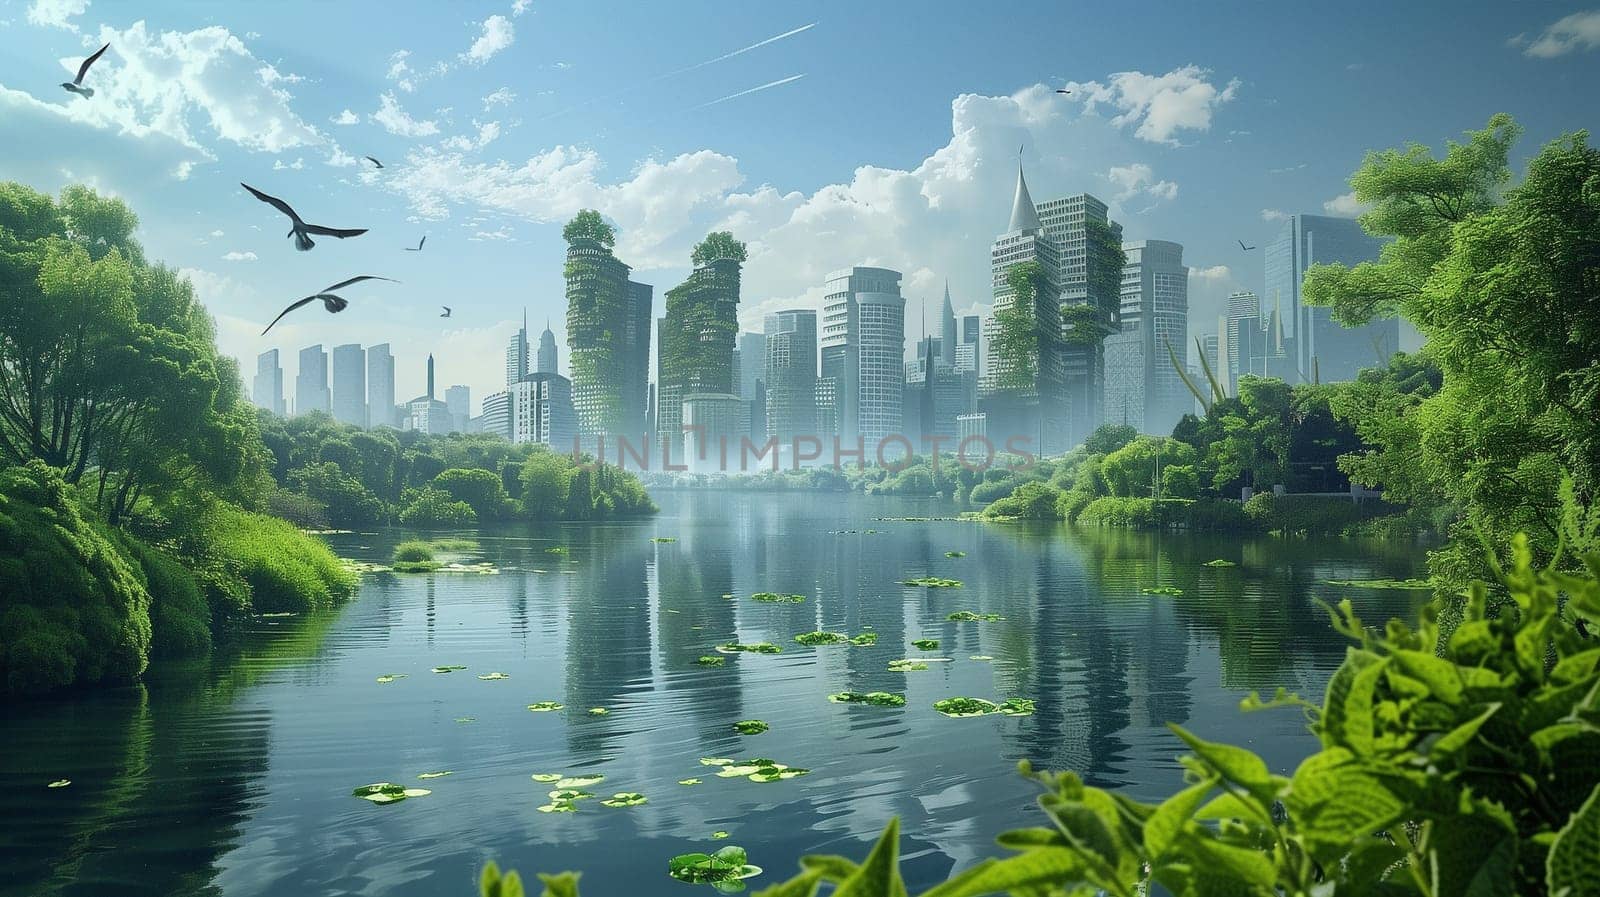 A futuristic cityscape featuring towering skyscrapers, sleek architecture, and a winding river cutting through the urban landscape.